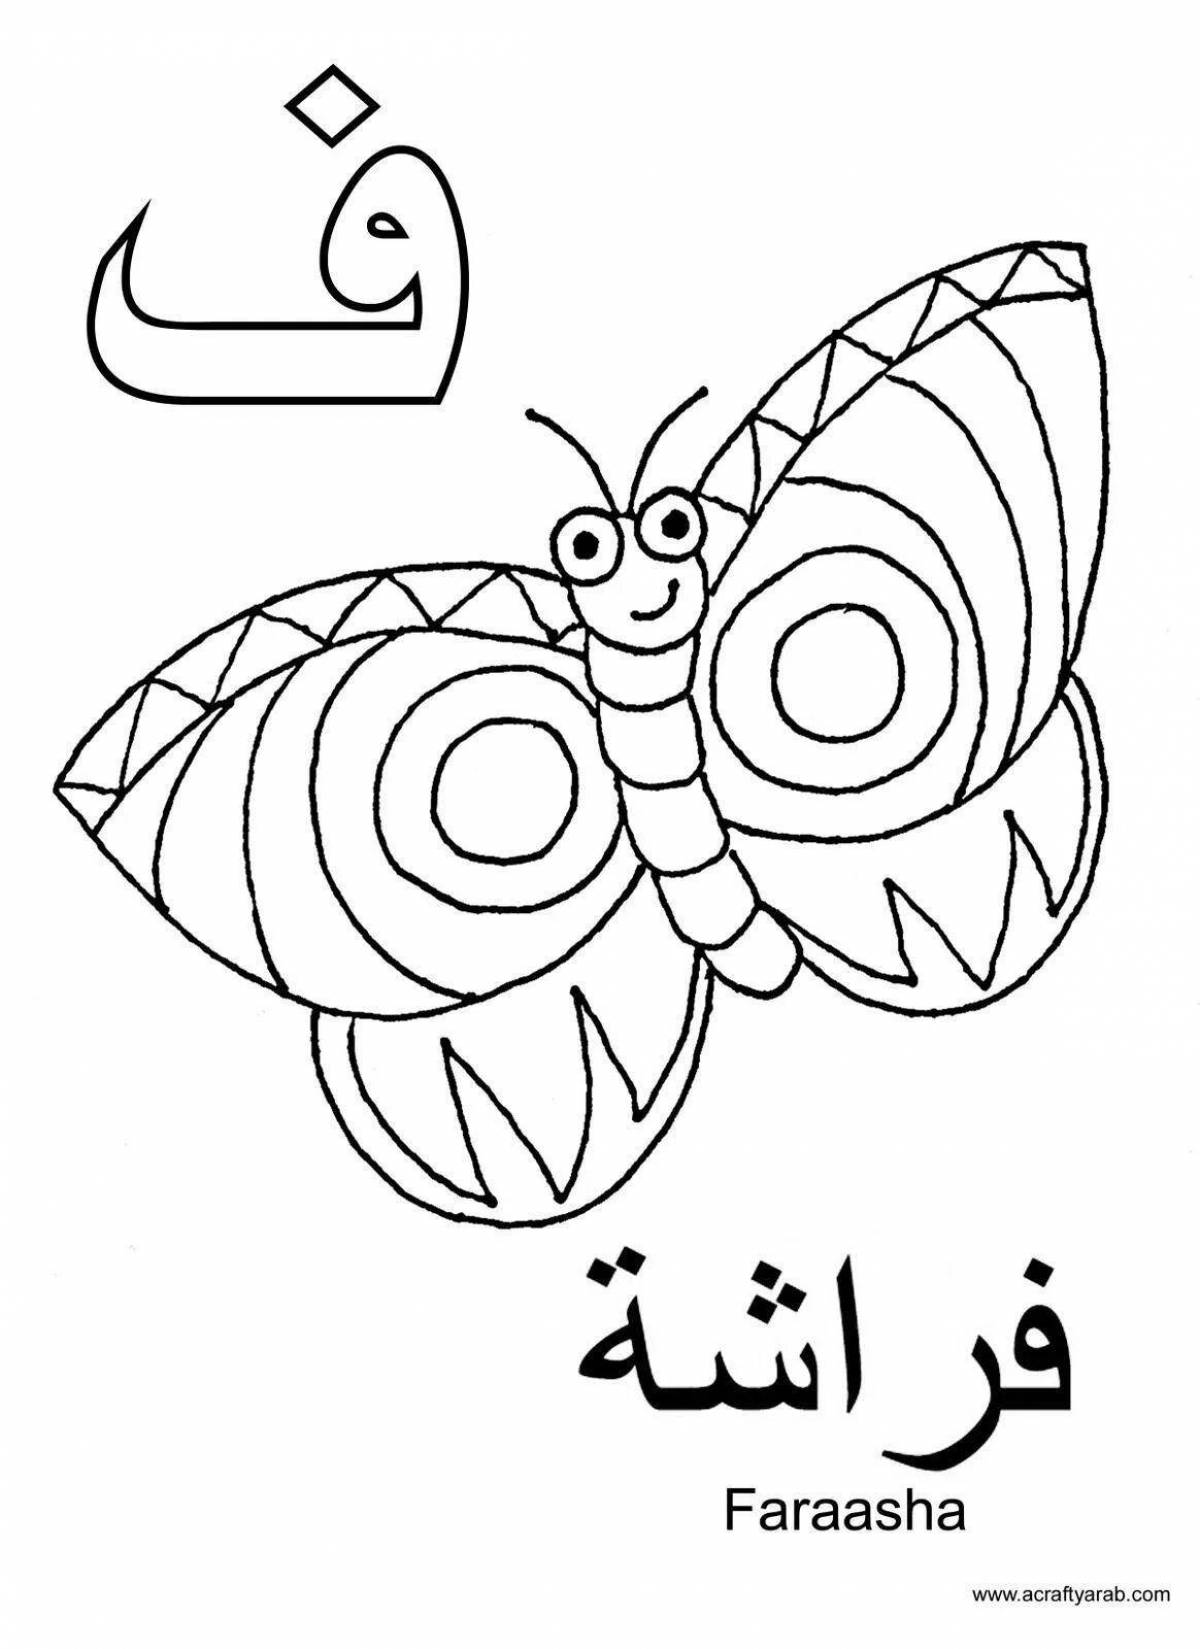 Bold coloring in Arabic letters